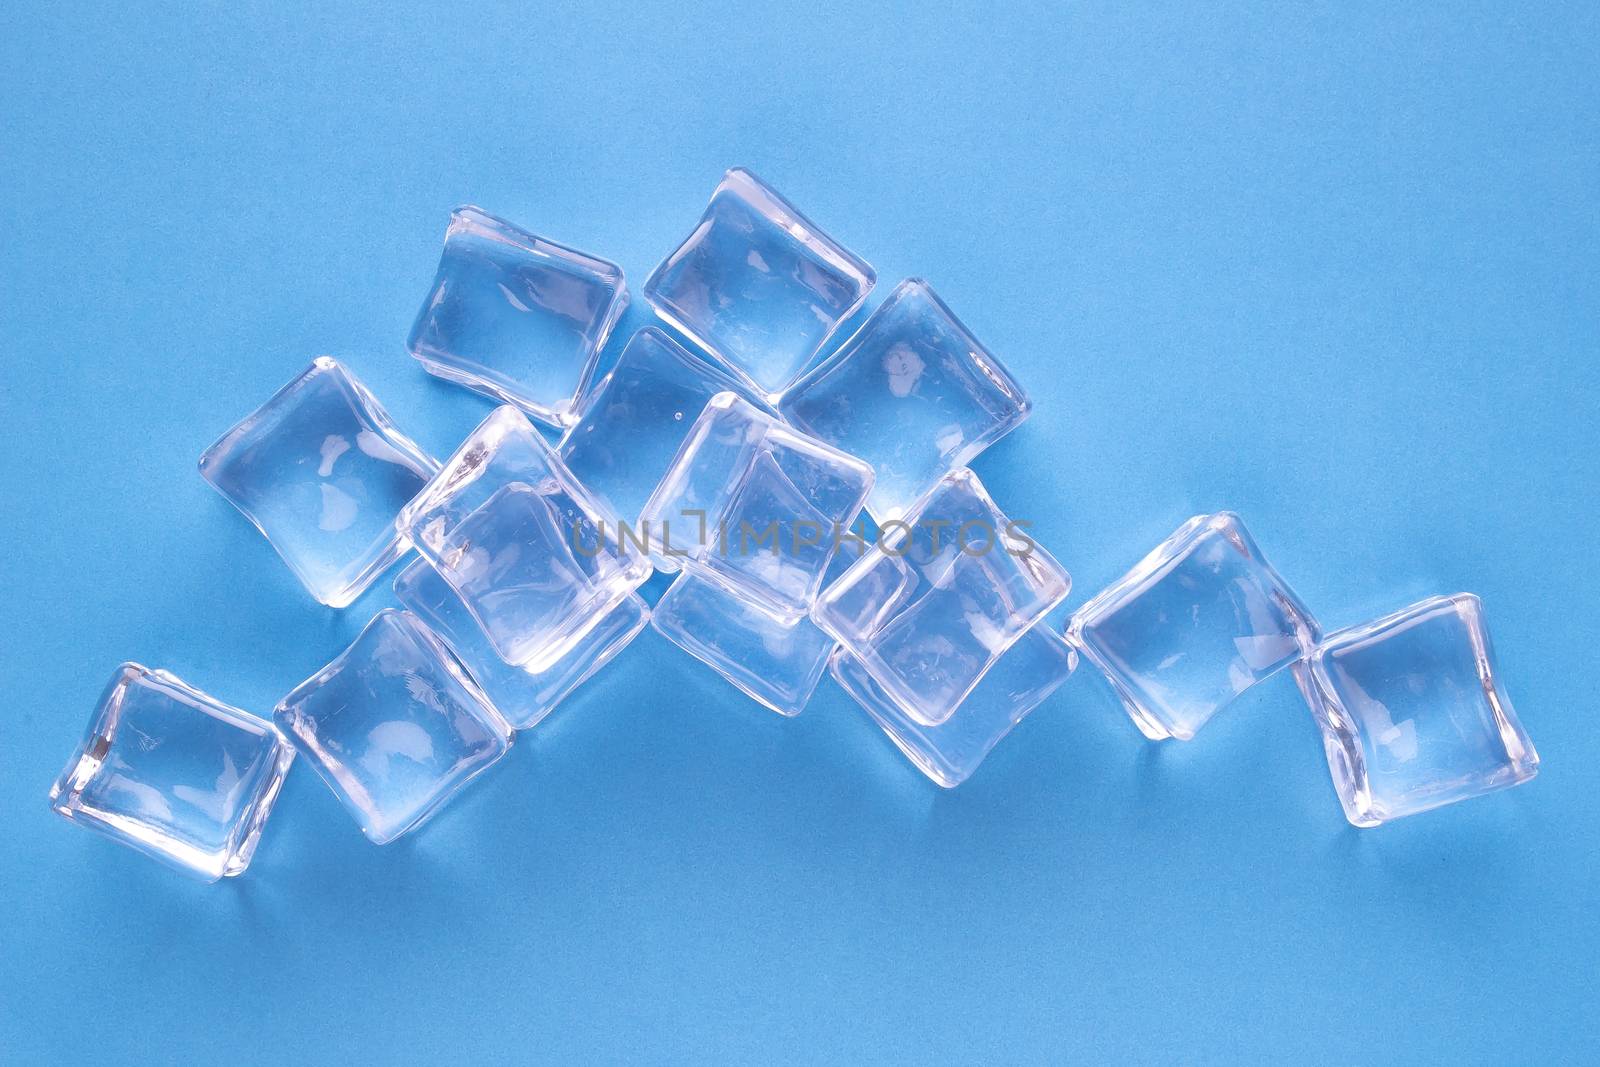 Crystal Ice cubes on a blue background by oasisamuel